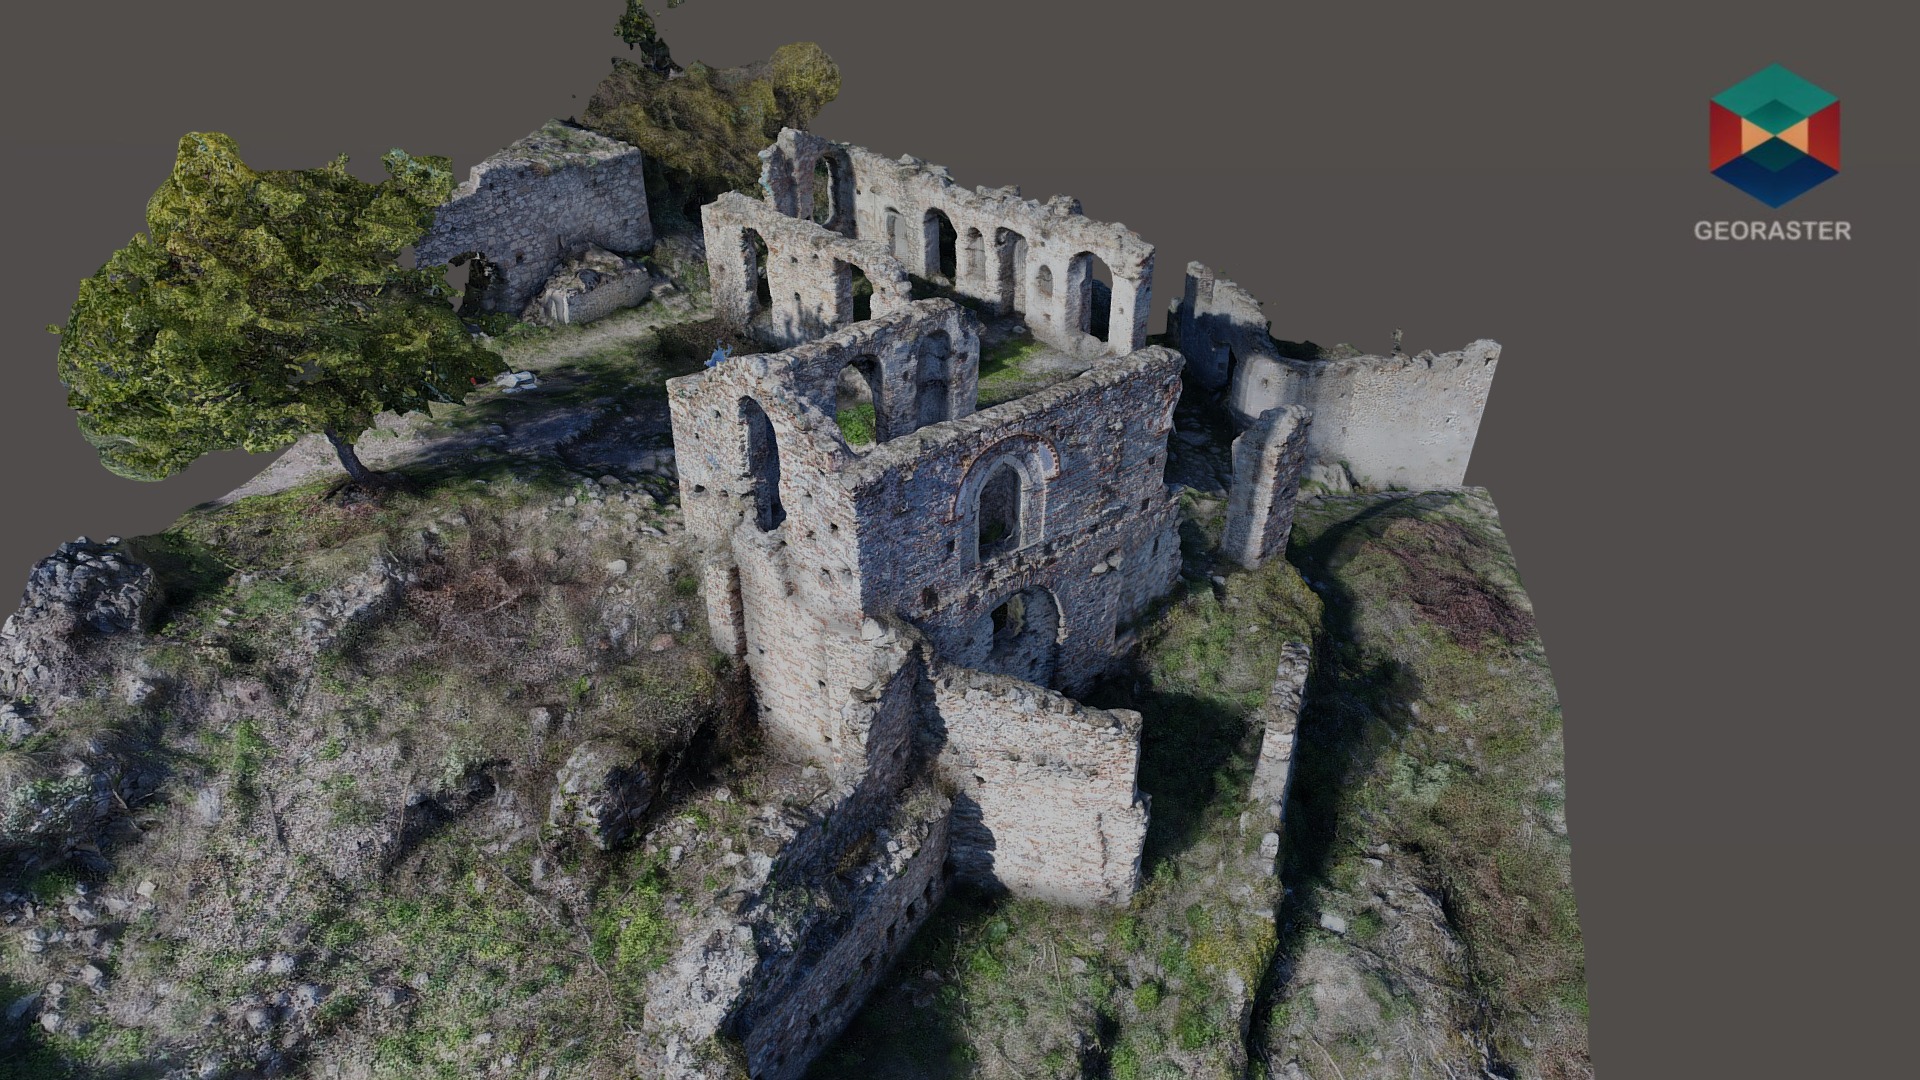 3D model Ruined Building 3d model 2 - This is a 3D model of the Ruined Building 3d model 2. The 3D model is about a stone building on a hill.